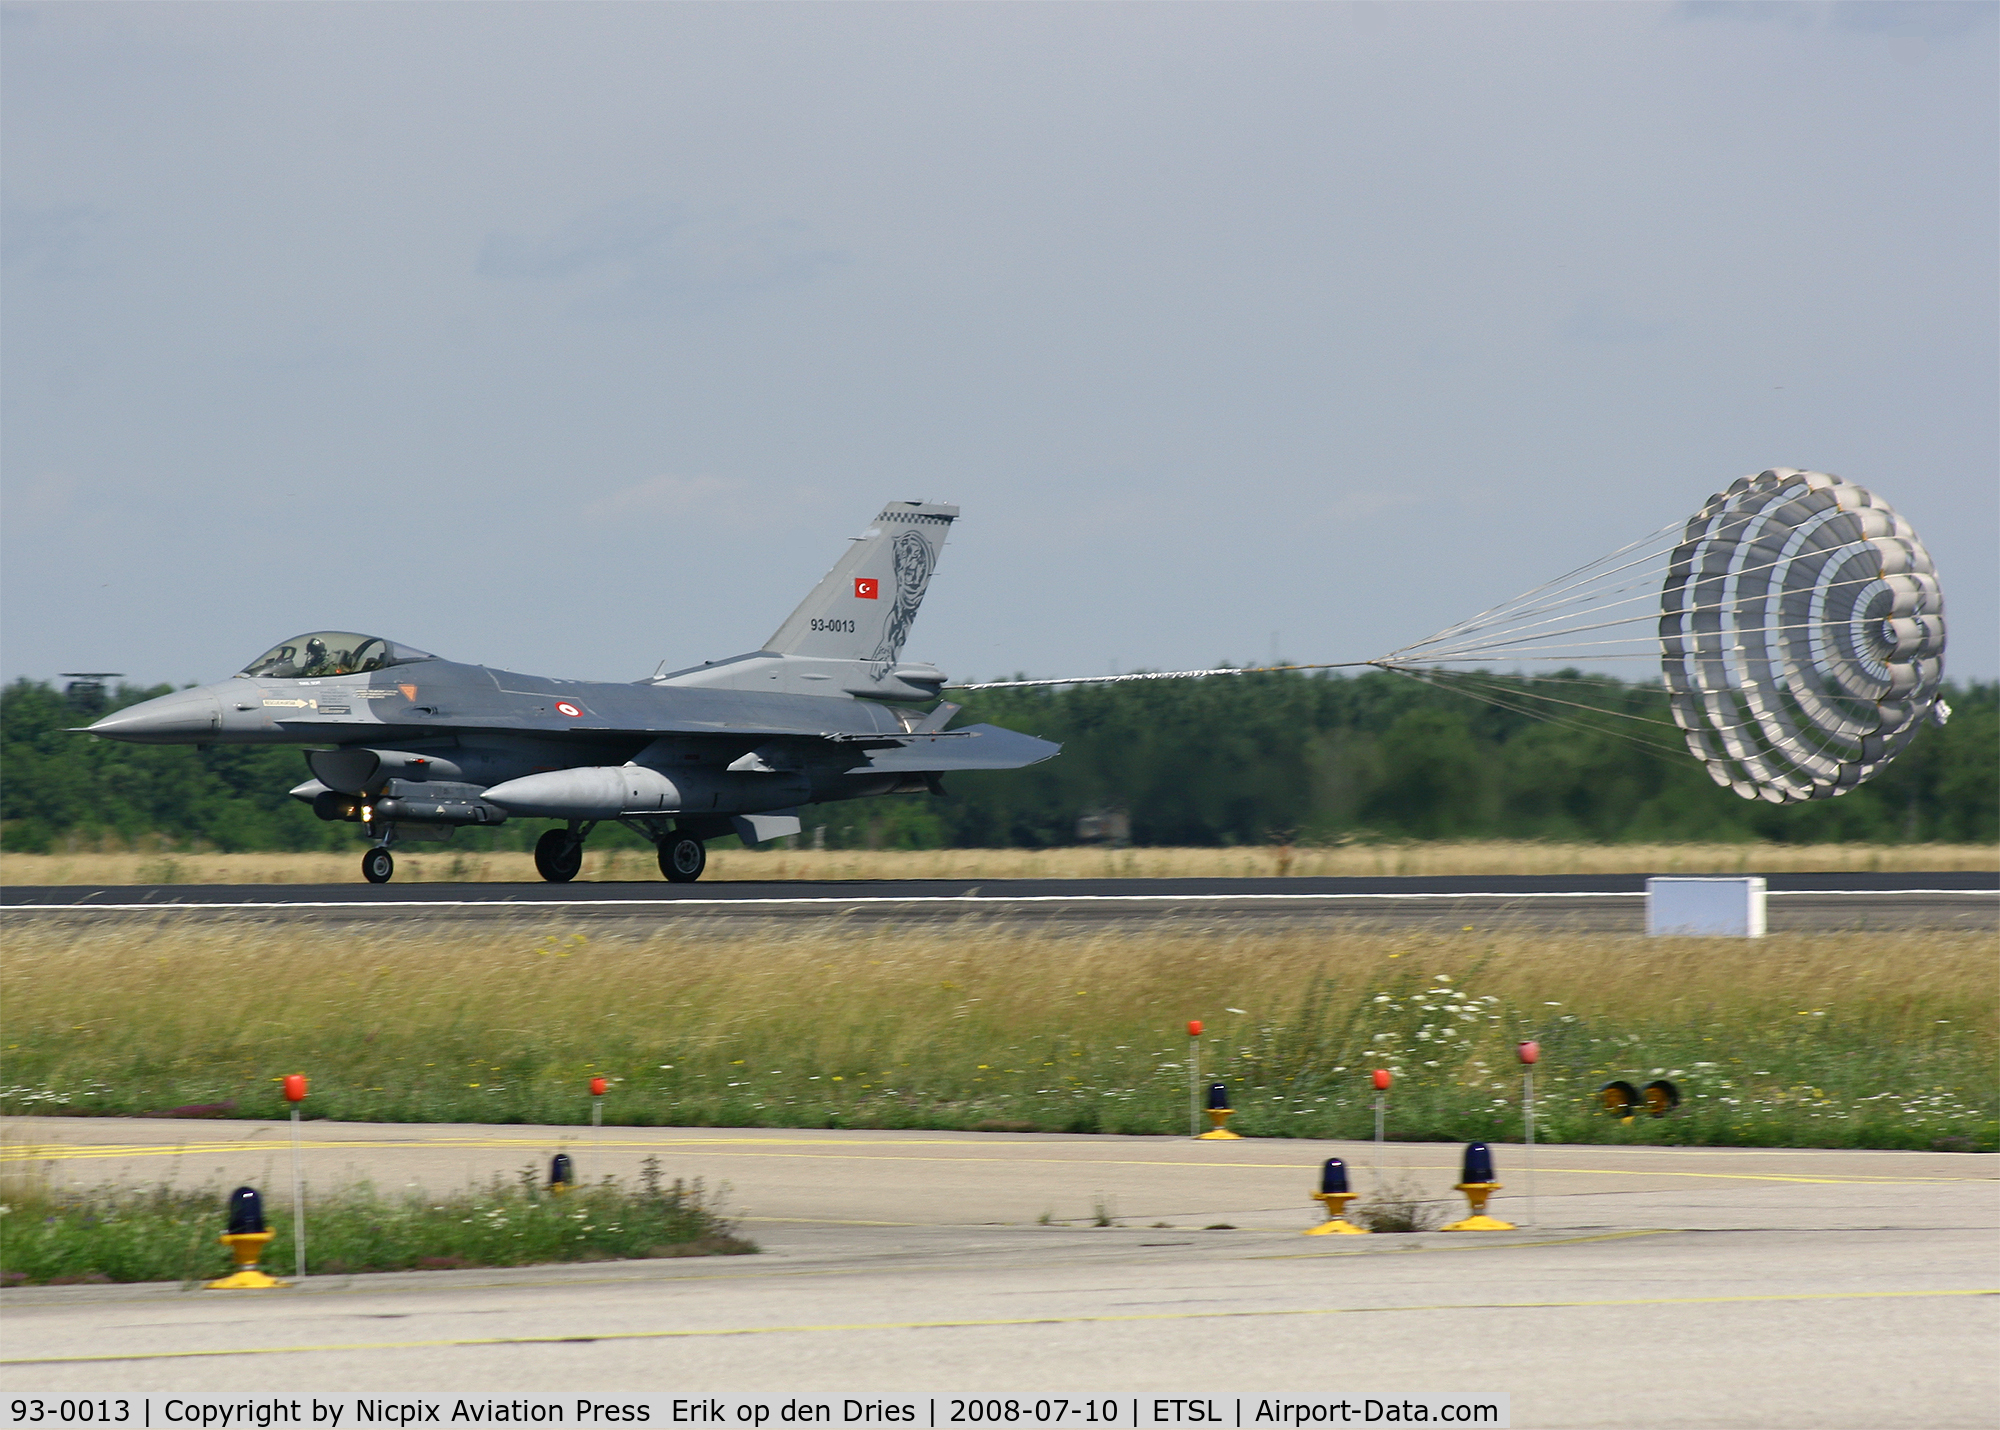 93-0013, Lockheed F-16C Fighting Falcon C/N 4R-135, Always nice to see is a dragchute landing! Turkish AF F-16C 93-0013 at Lechfeld AB, Germany.